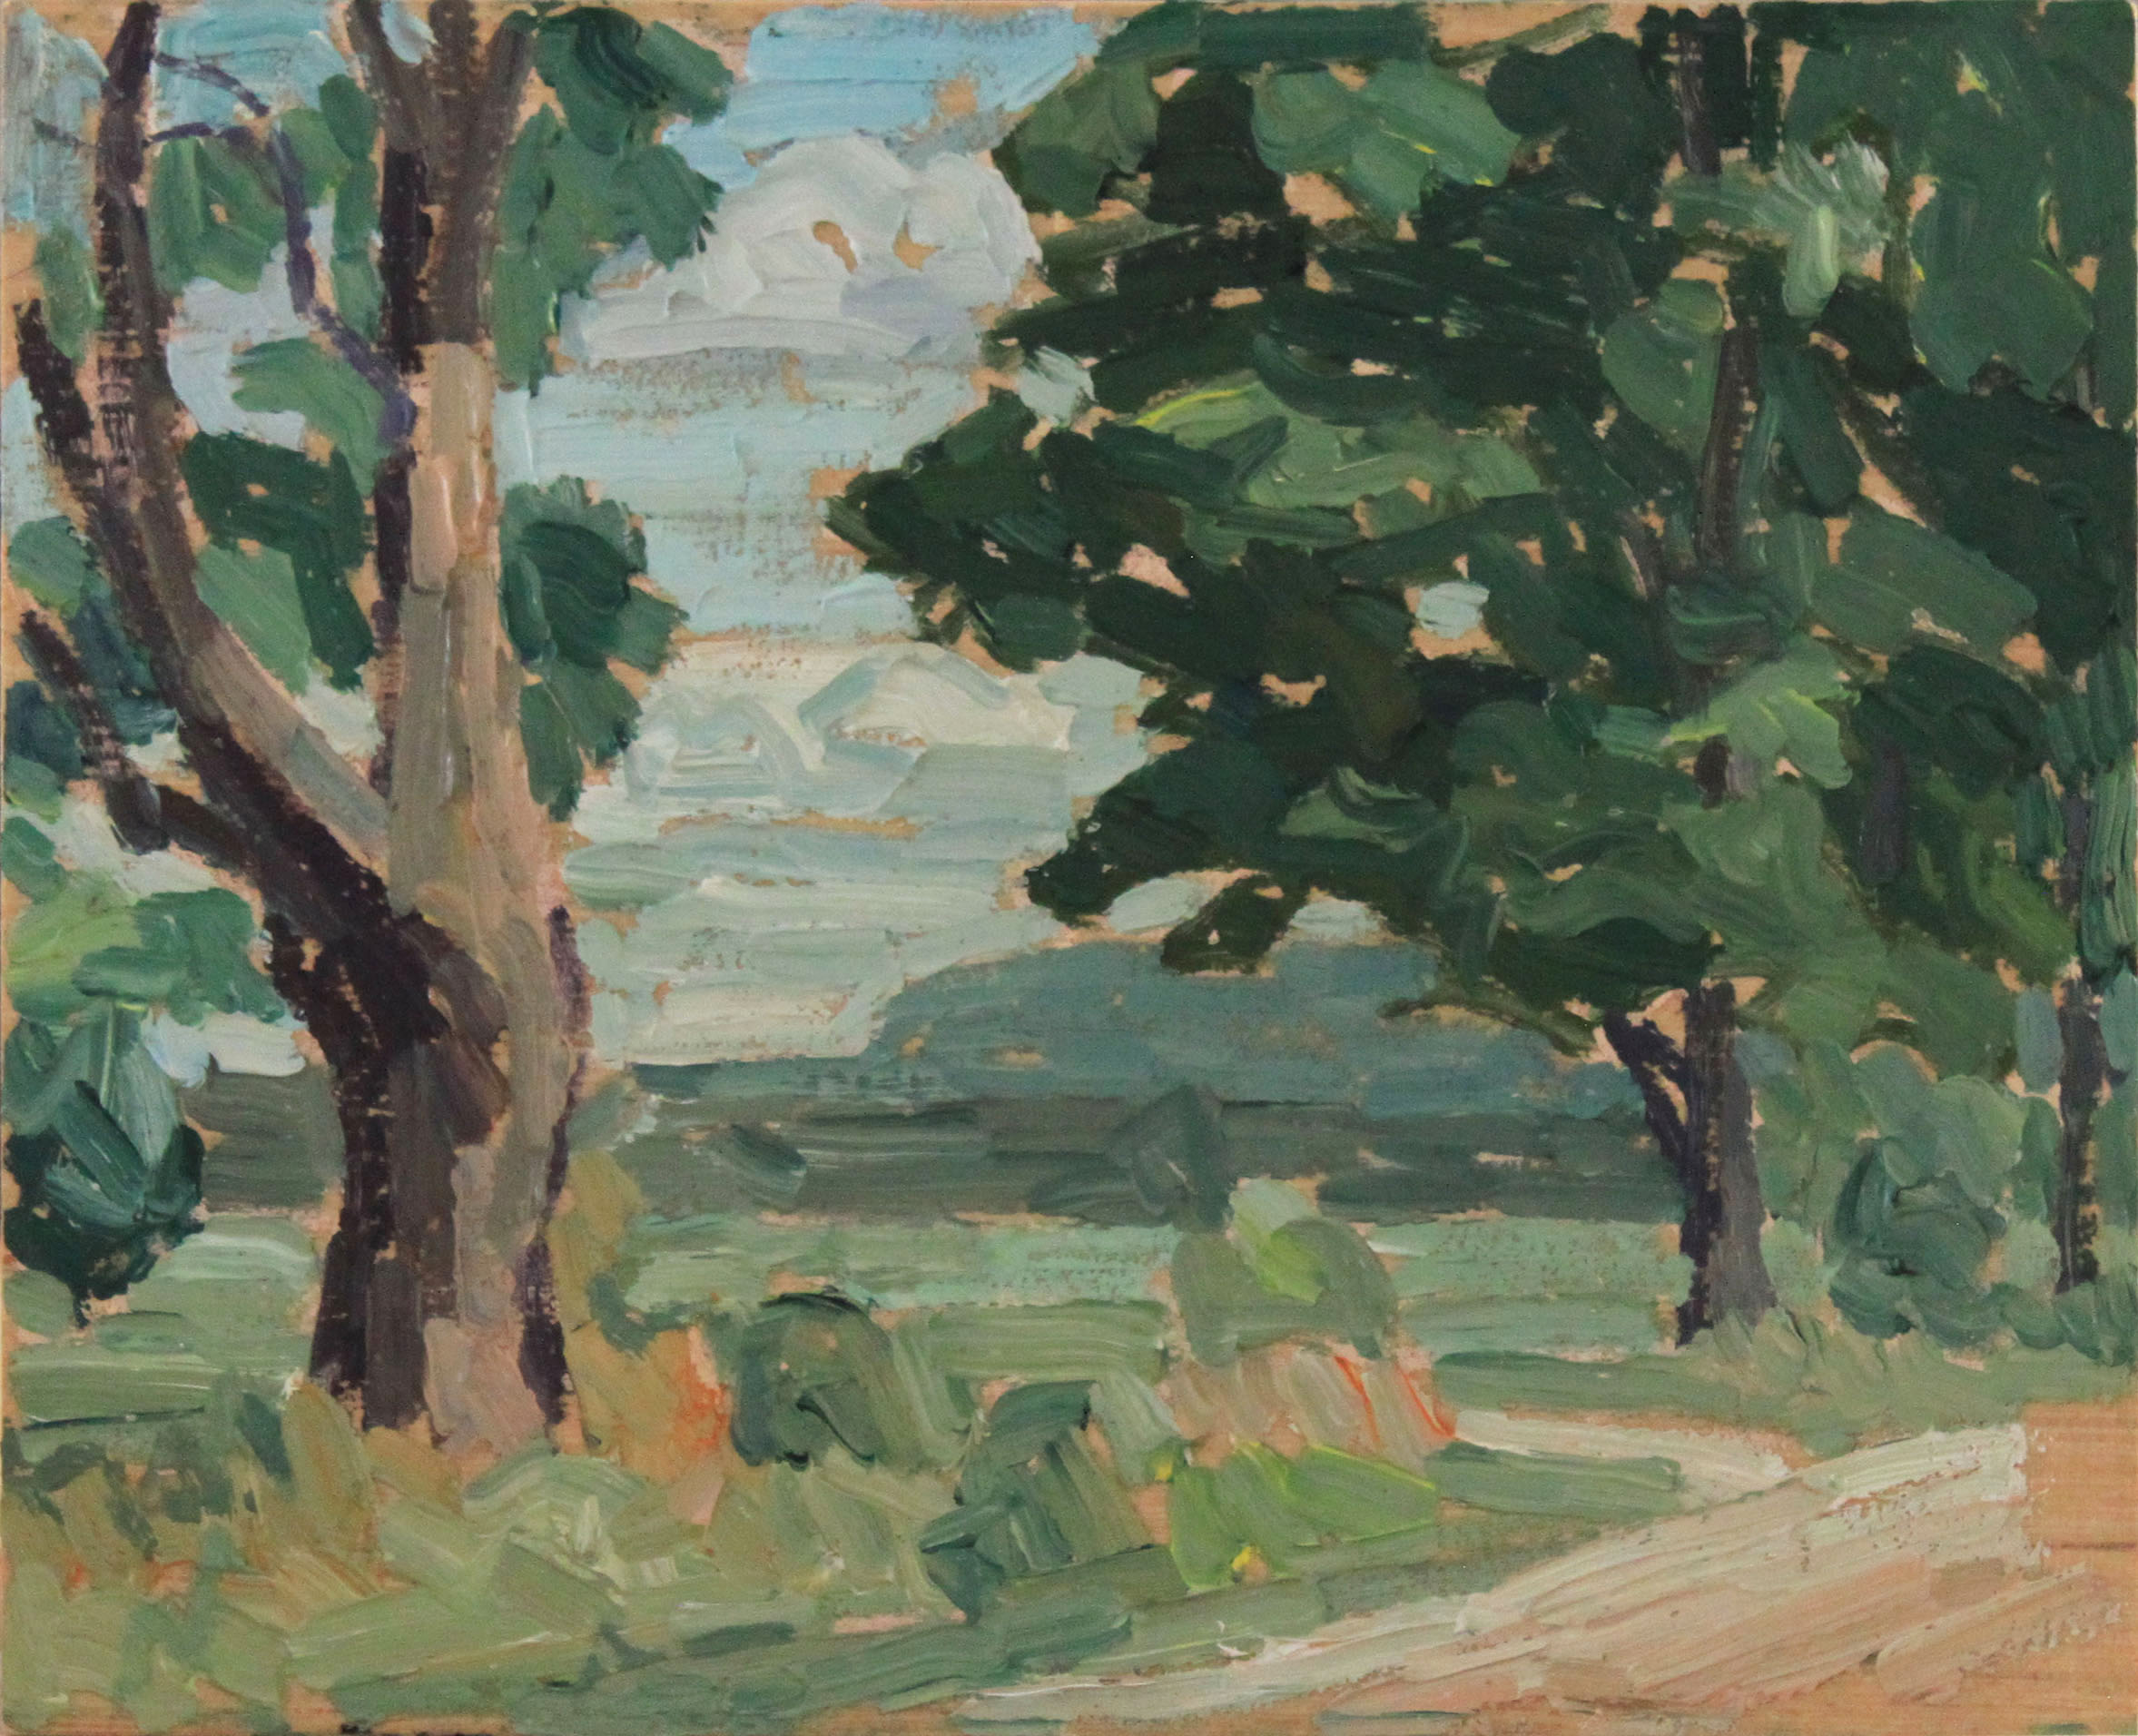 French's Hill, 8" x 9.5", oil on wood, $180